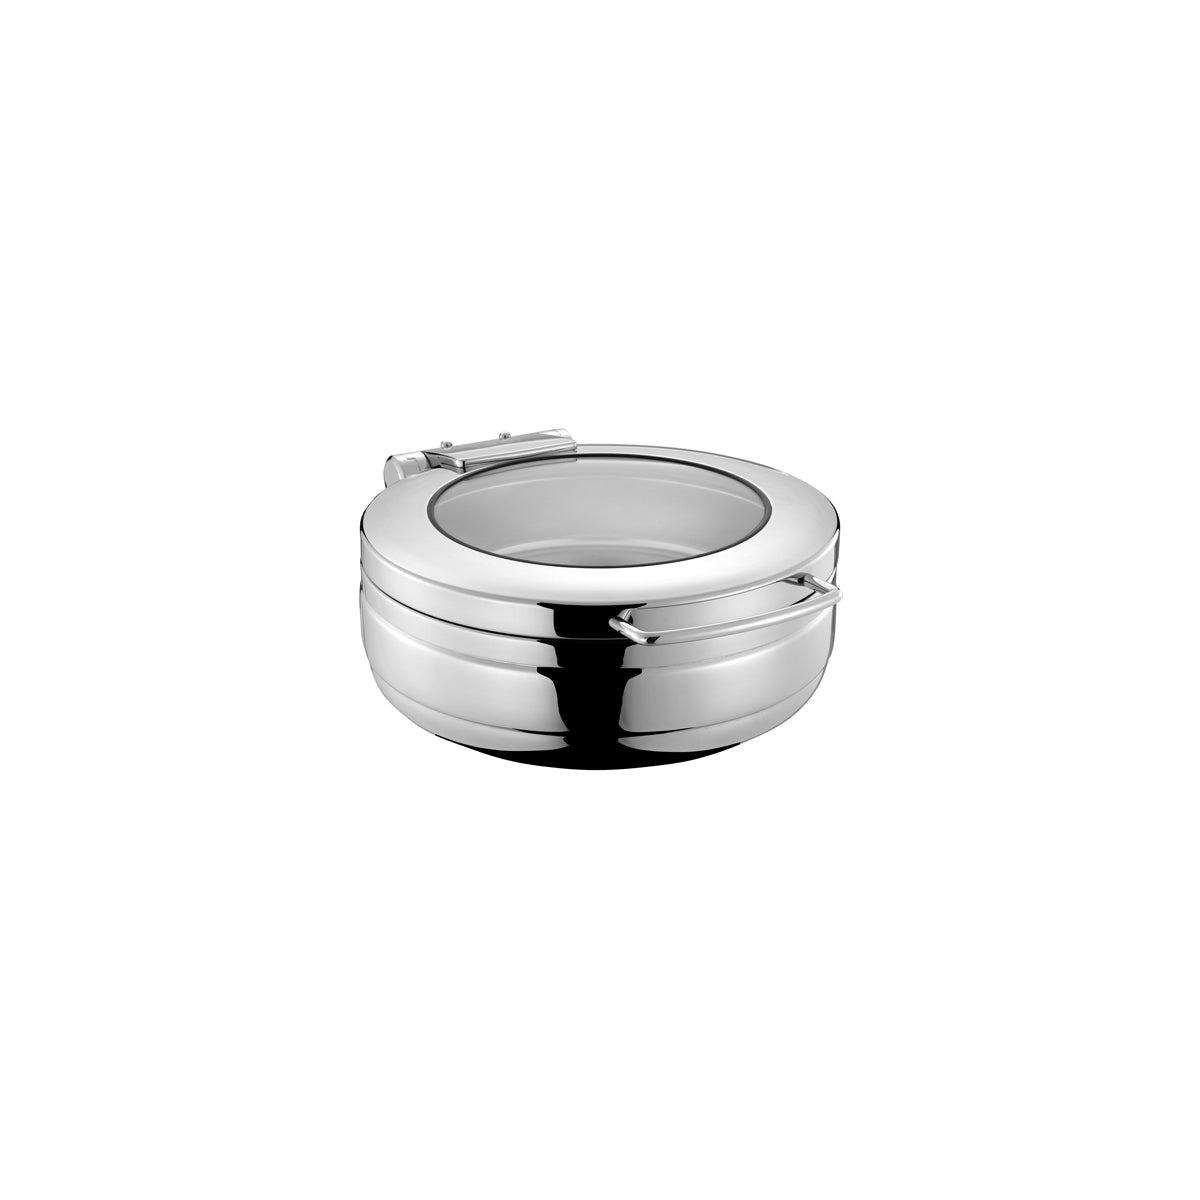 54905 Chef Inox Induction Chafer Round 18/8 Stainless Steel Small with Glass Lid Tomkin Australia Hospitality Supplies